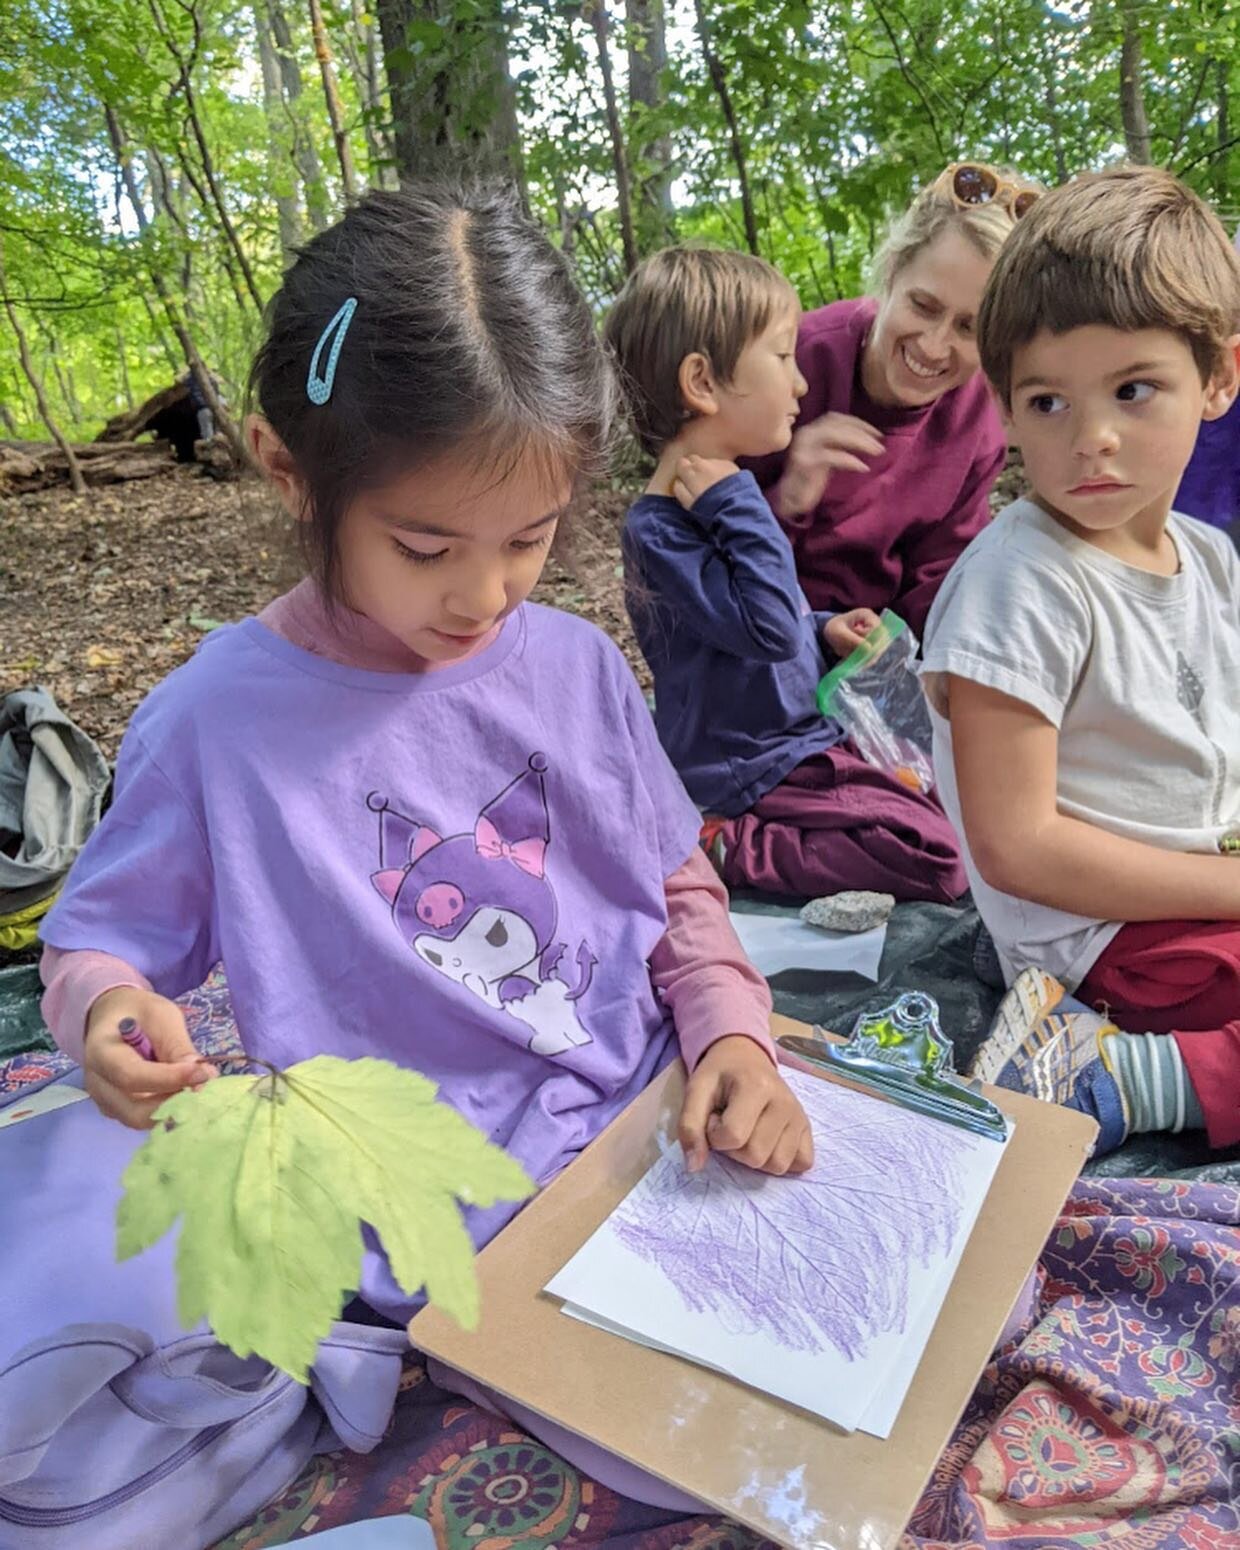 💕🌲 2023 was a very special year for us. Between our year long camps and after school program, we had some extraordinary experiences. We explored the forest. We learned more about ourselves, each other, and nature. We laughed and played in the light